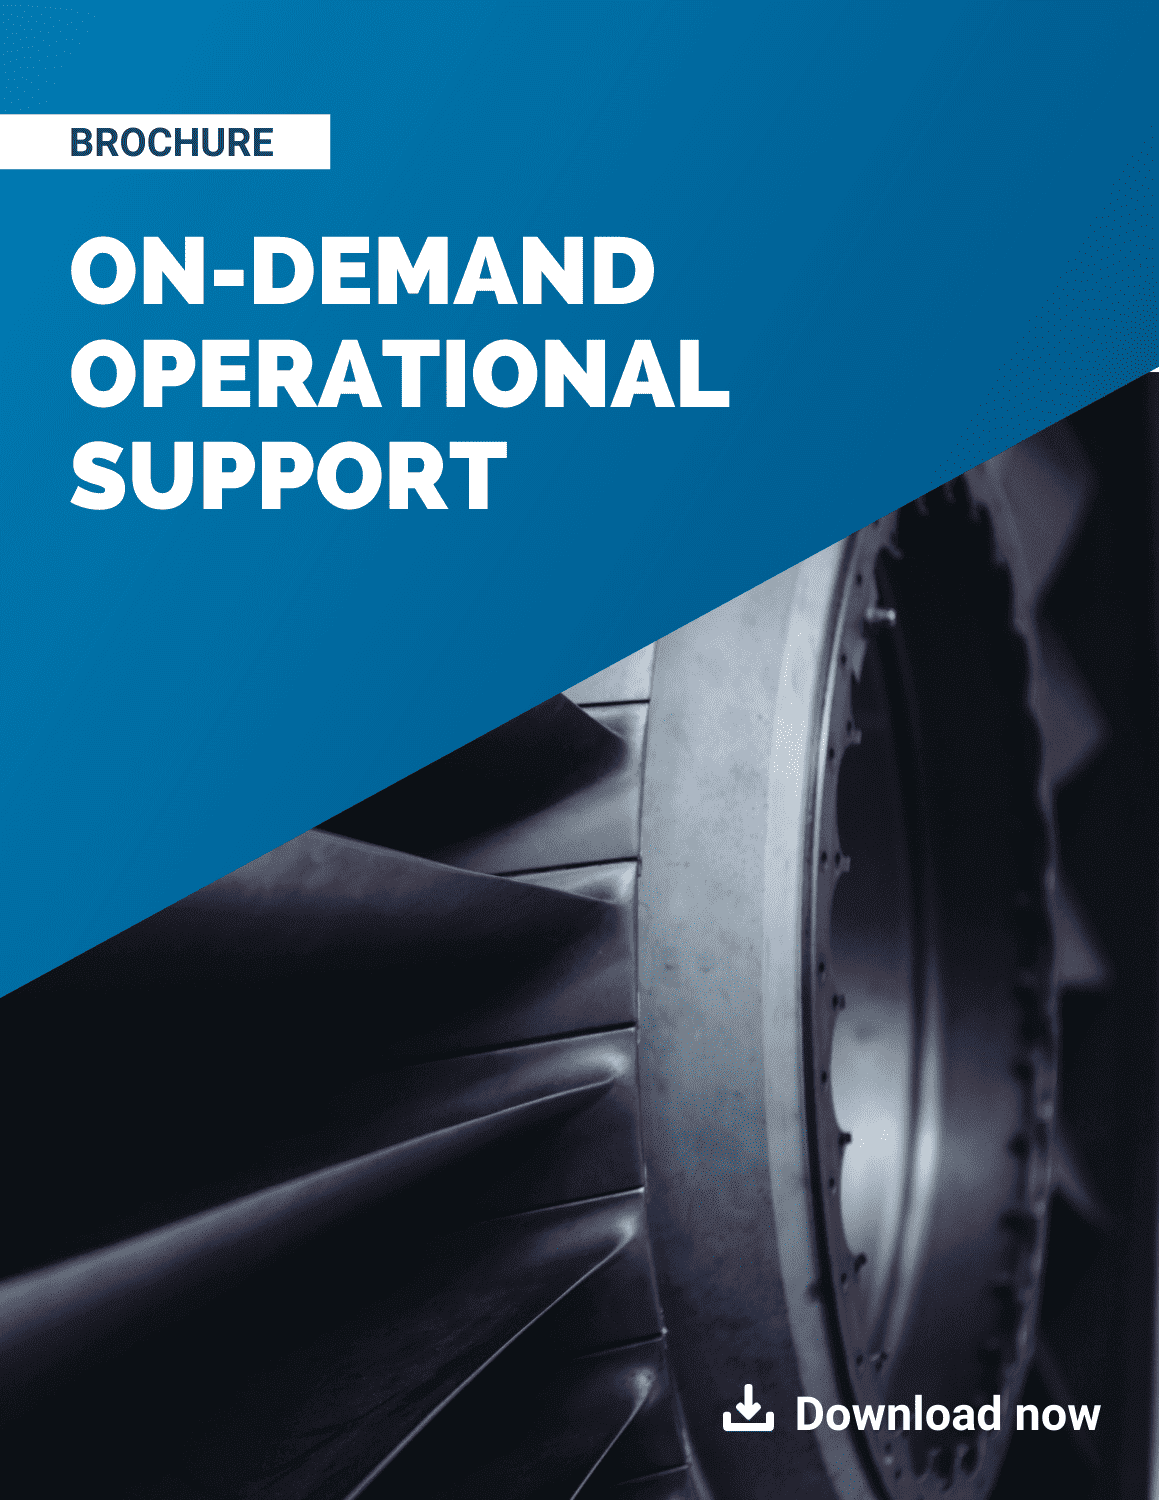 on-demand operational support